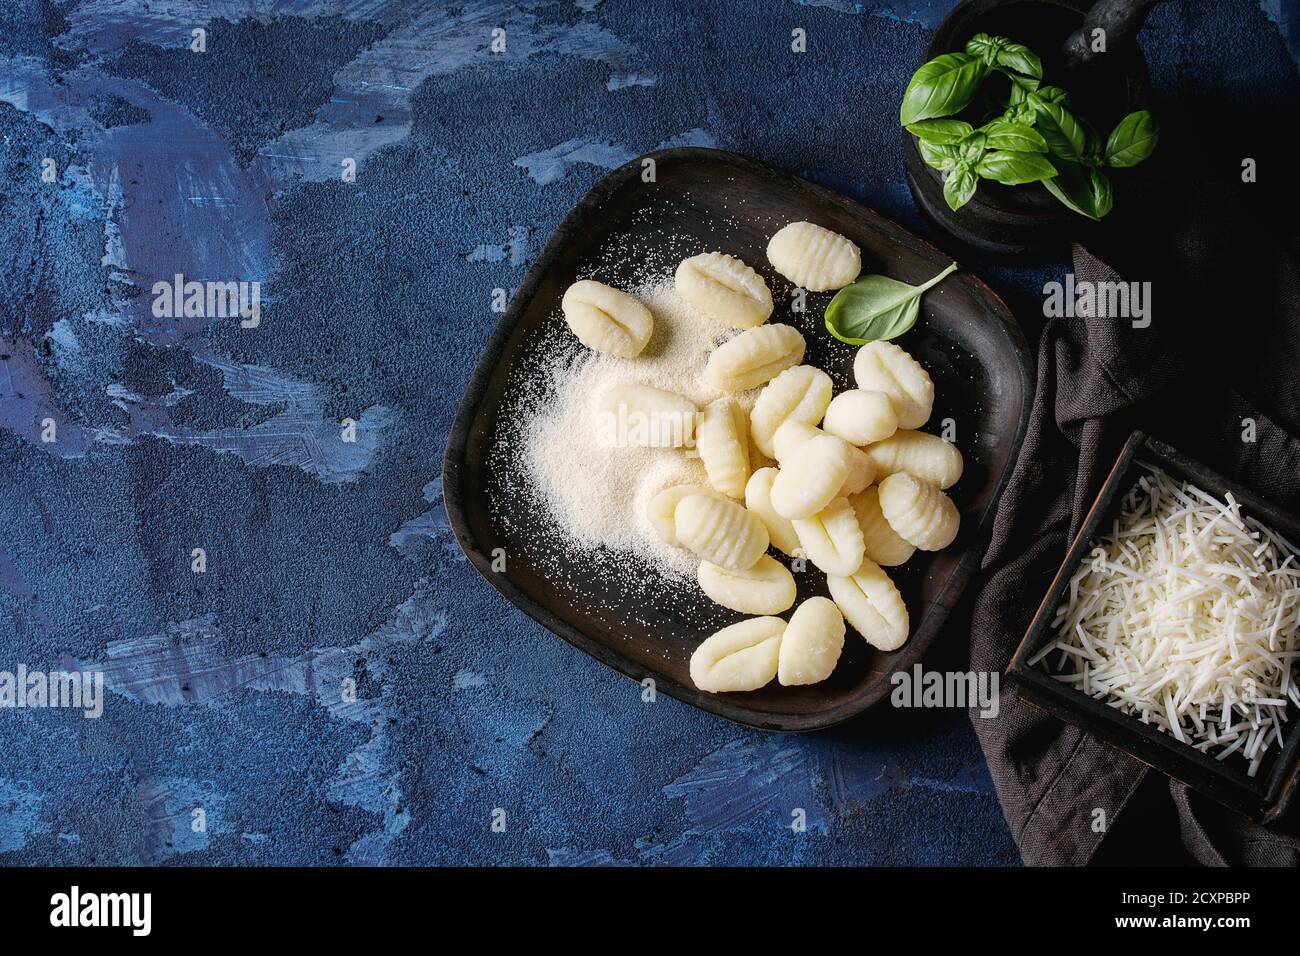 Raw uncooked potato gnocchi in black wooden plates with ingredients. Flour, grated parmesan cheese, basil, over dark blue concrete background. Top vie Stock Photo